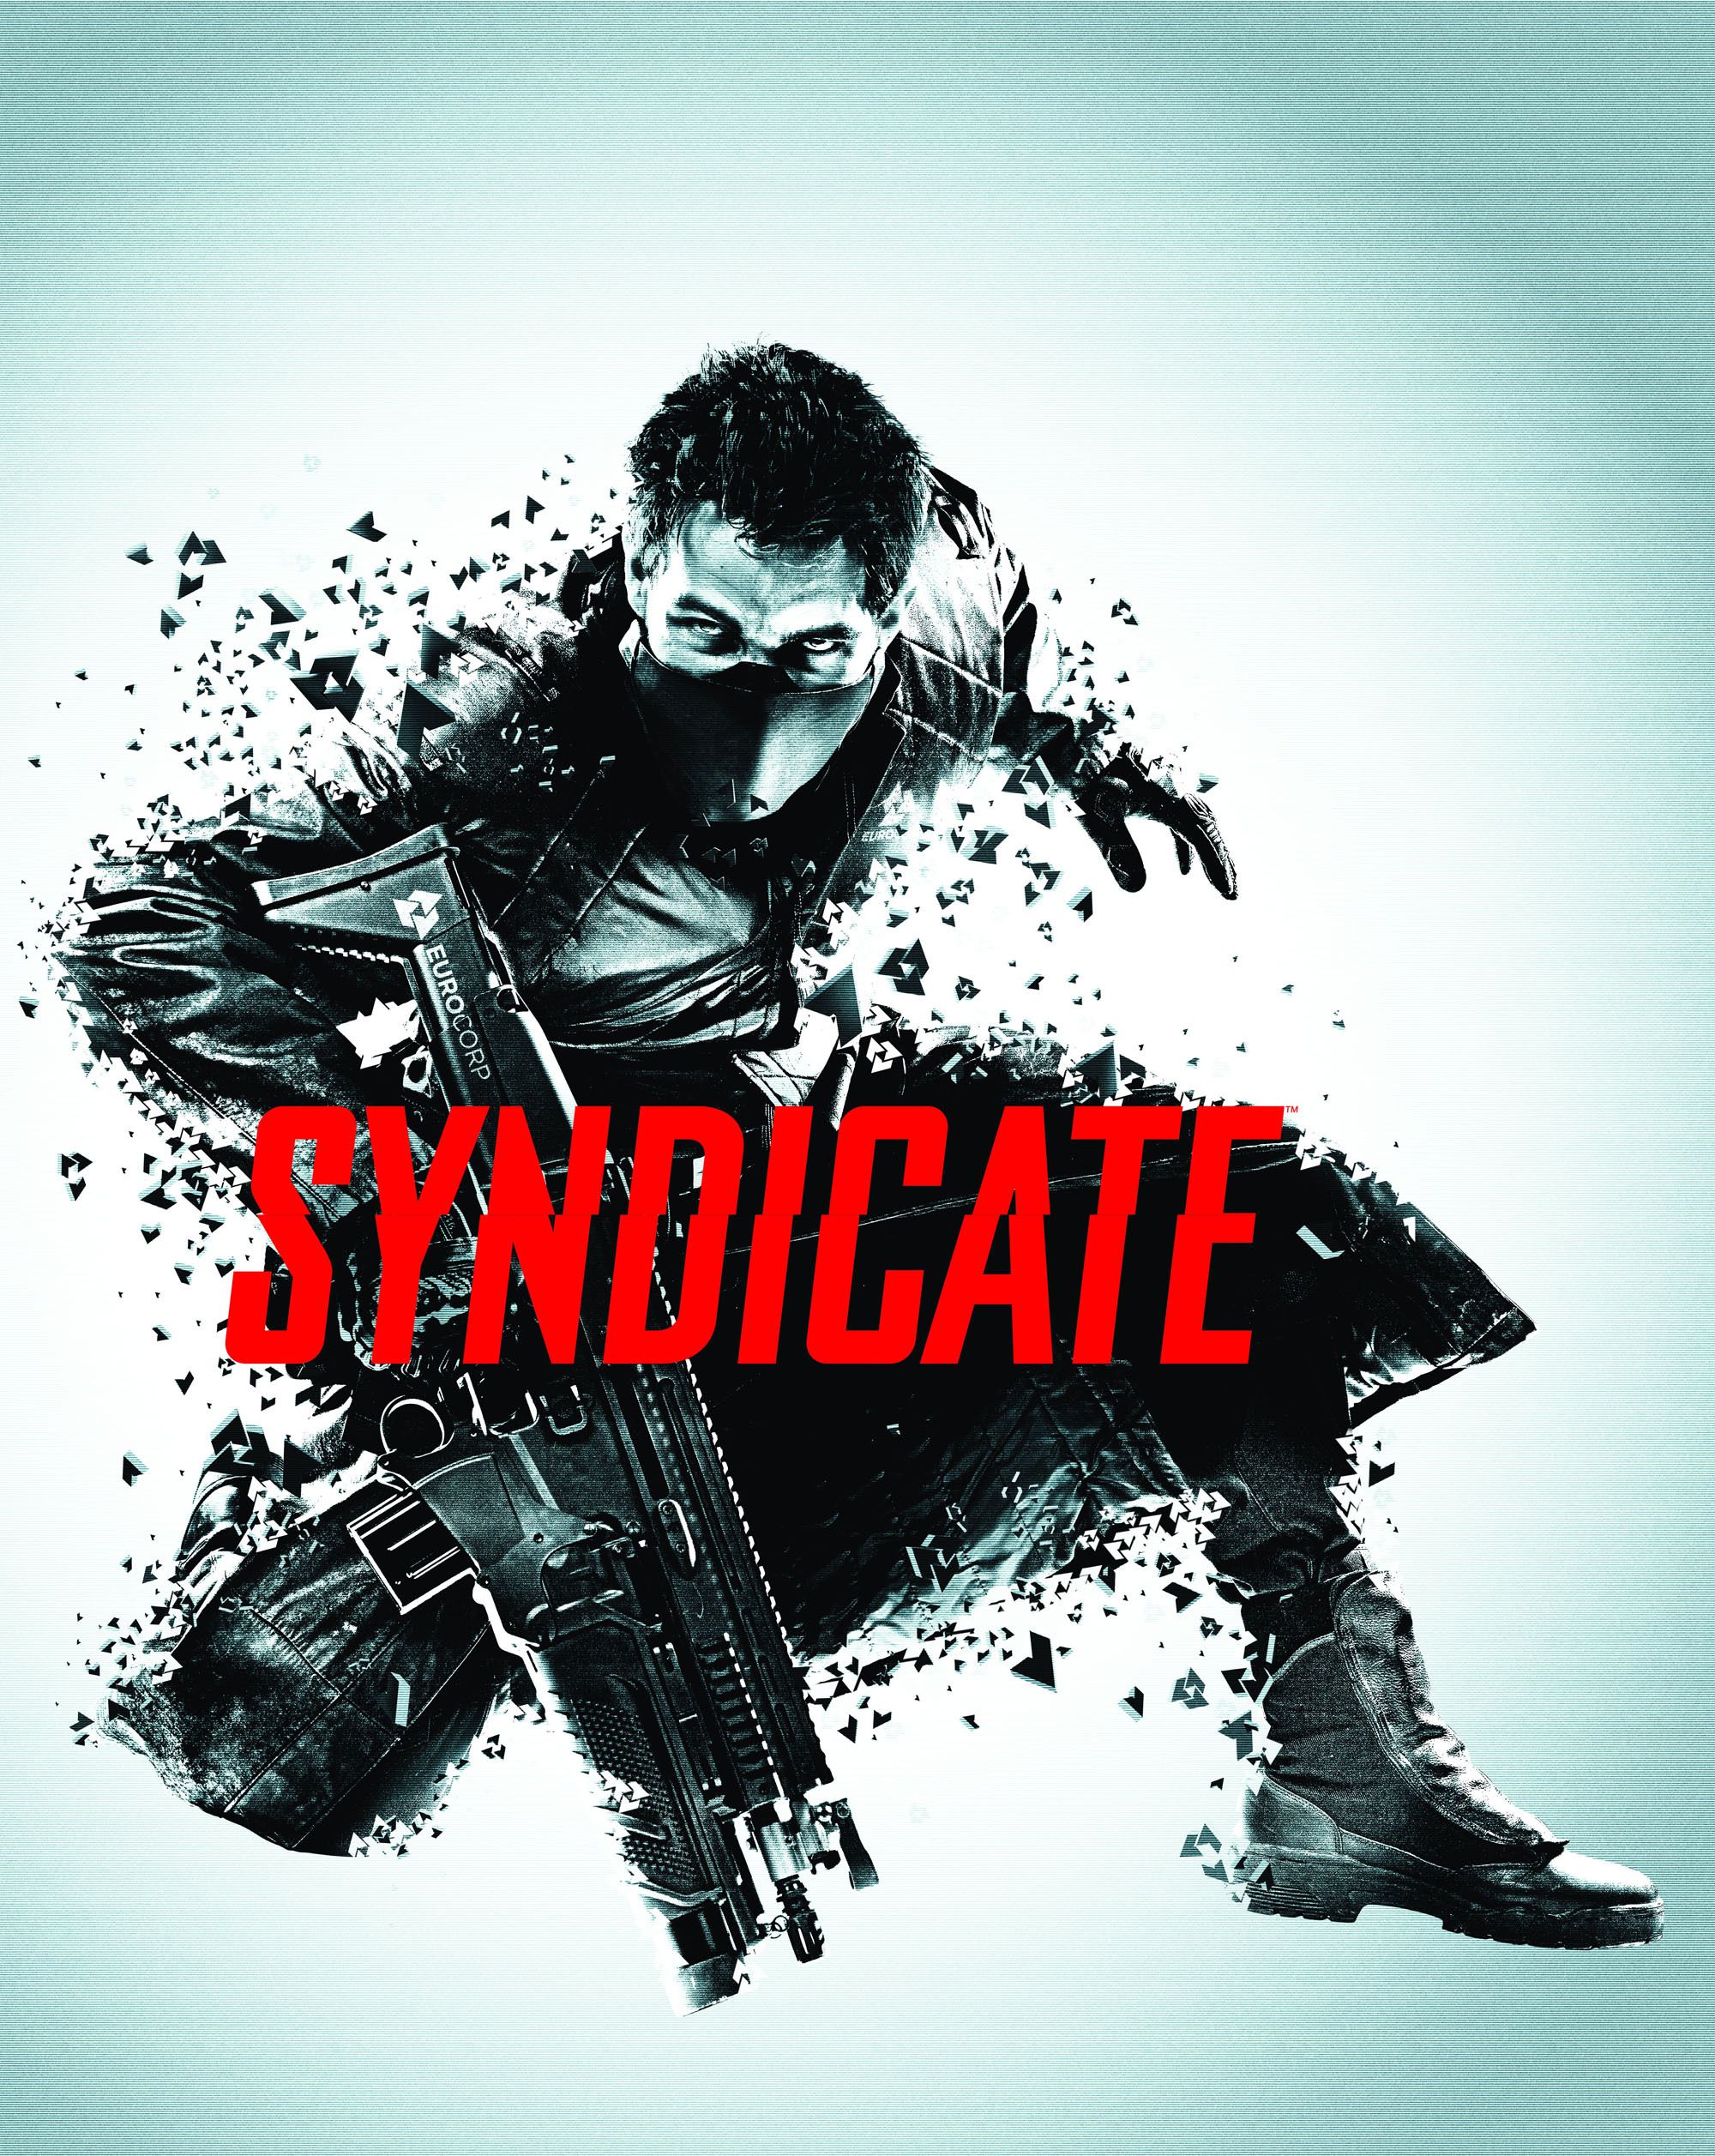 Syndicate (5)